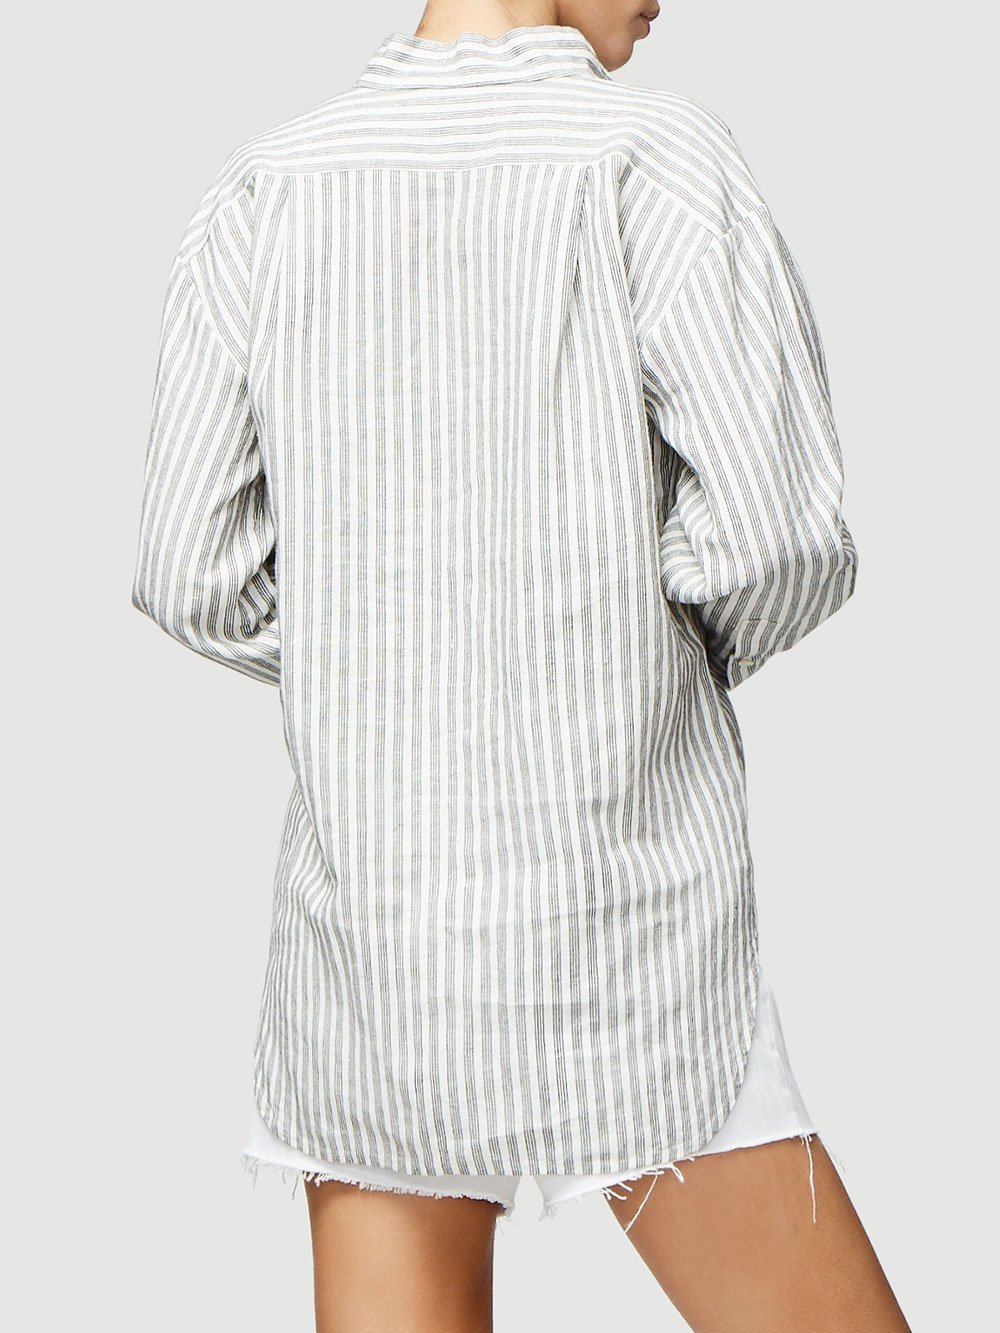 FRAME - Clean Collared Shirt in Off White Multi